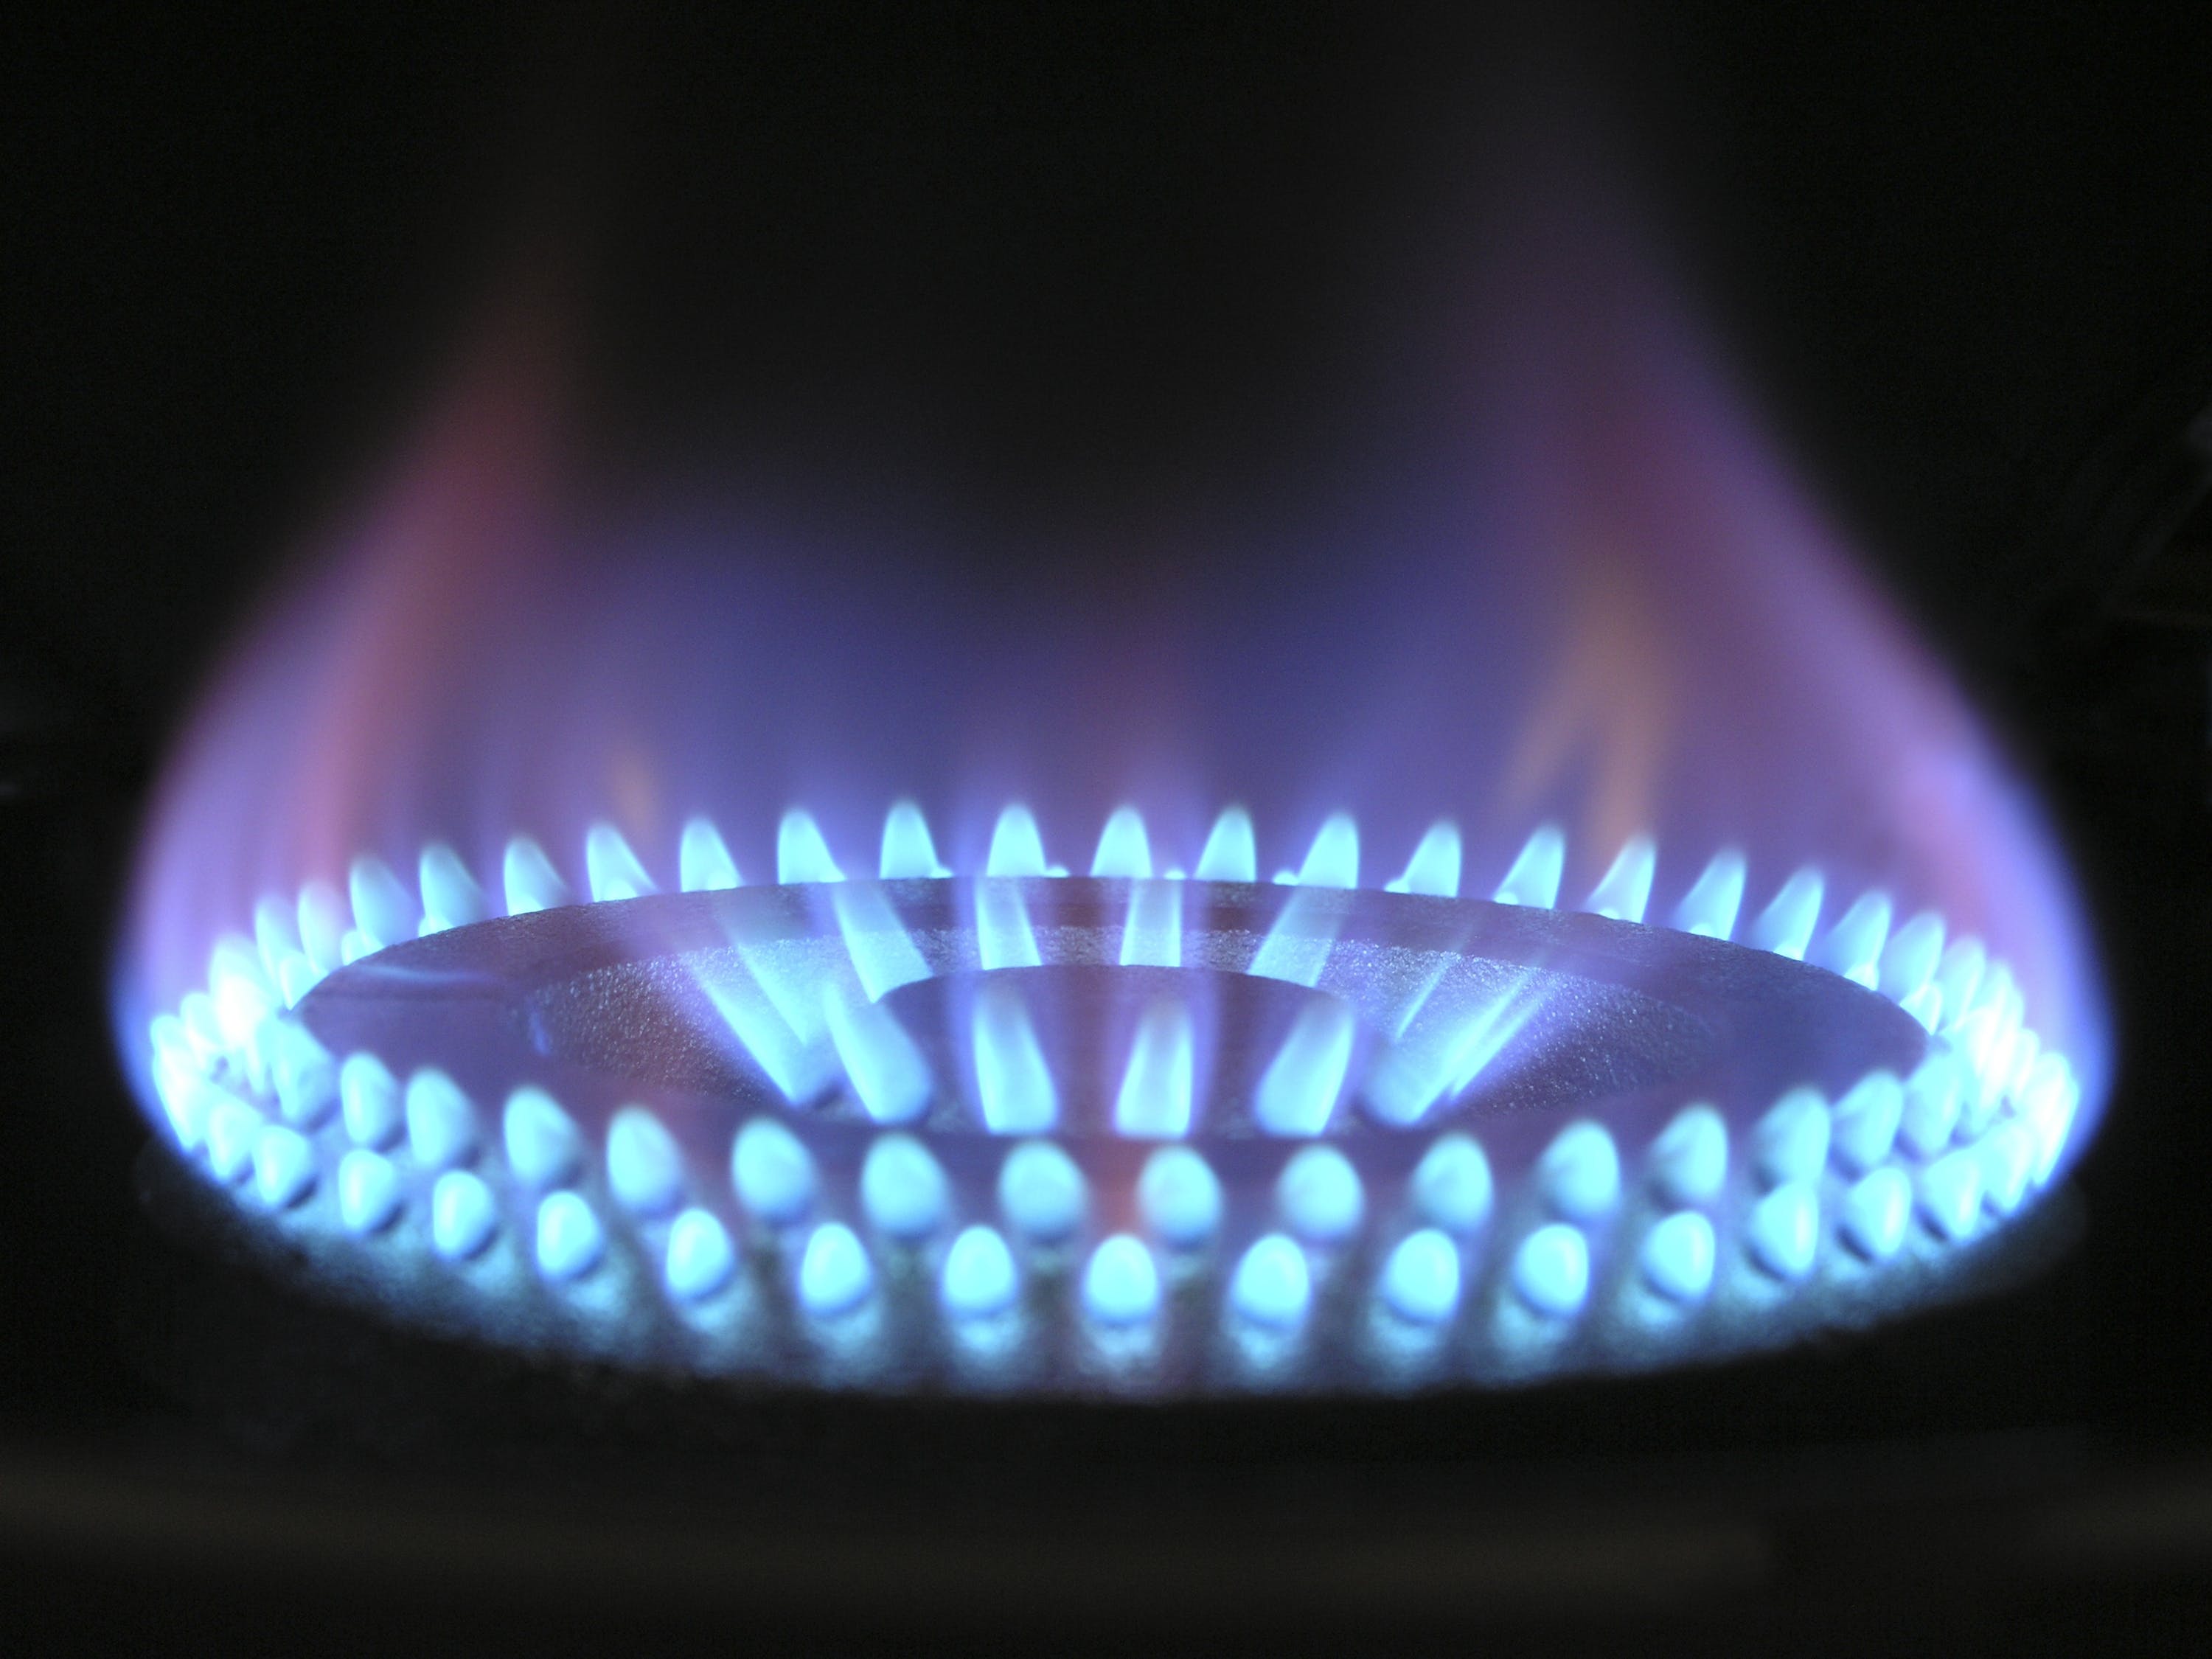 EU Plans to Reduce Gas Consumption by 15% Awaited by Hungary